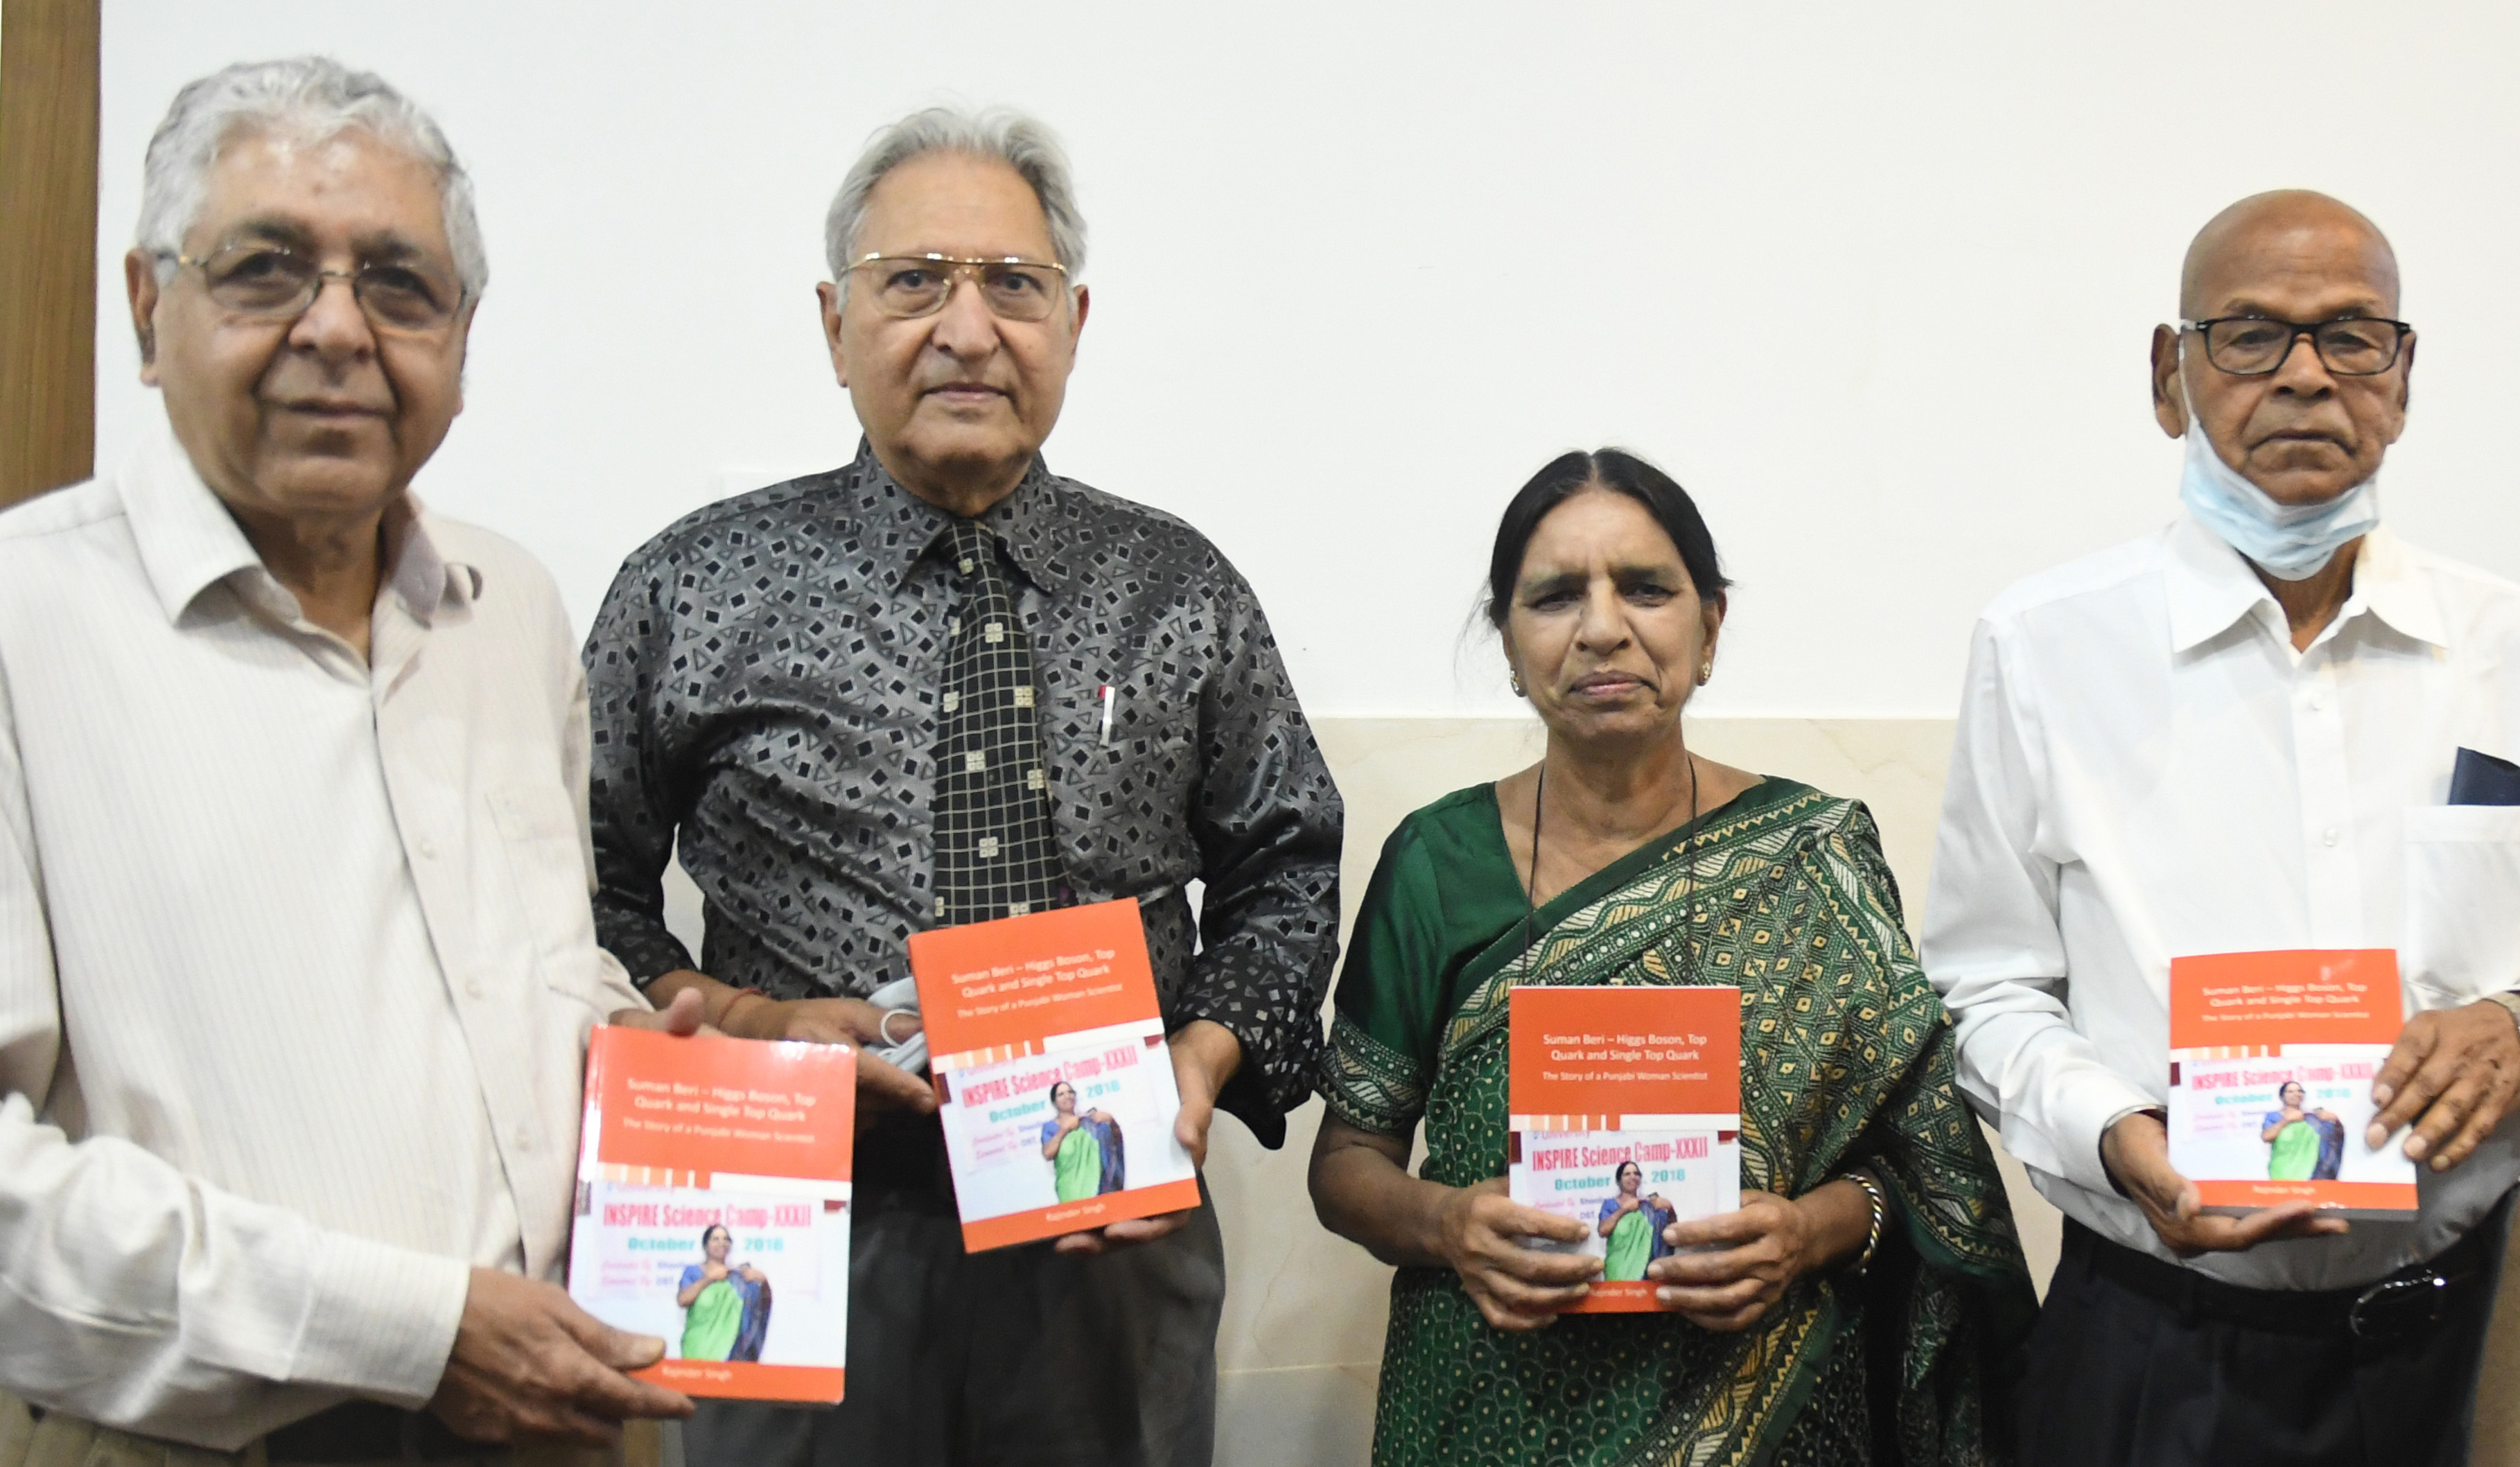 Biography of first woman prof of Panjab University Physics Department released